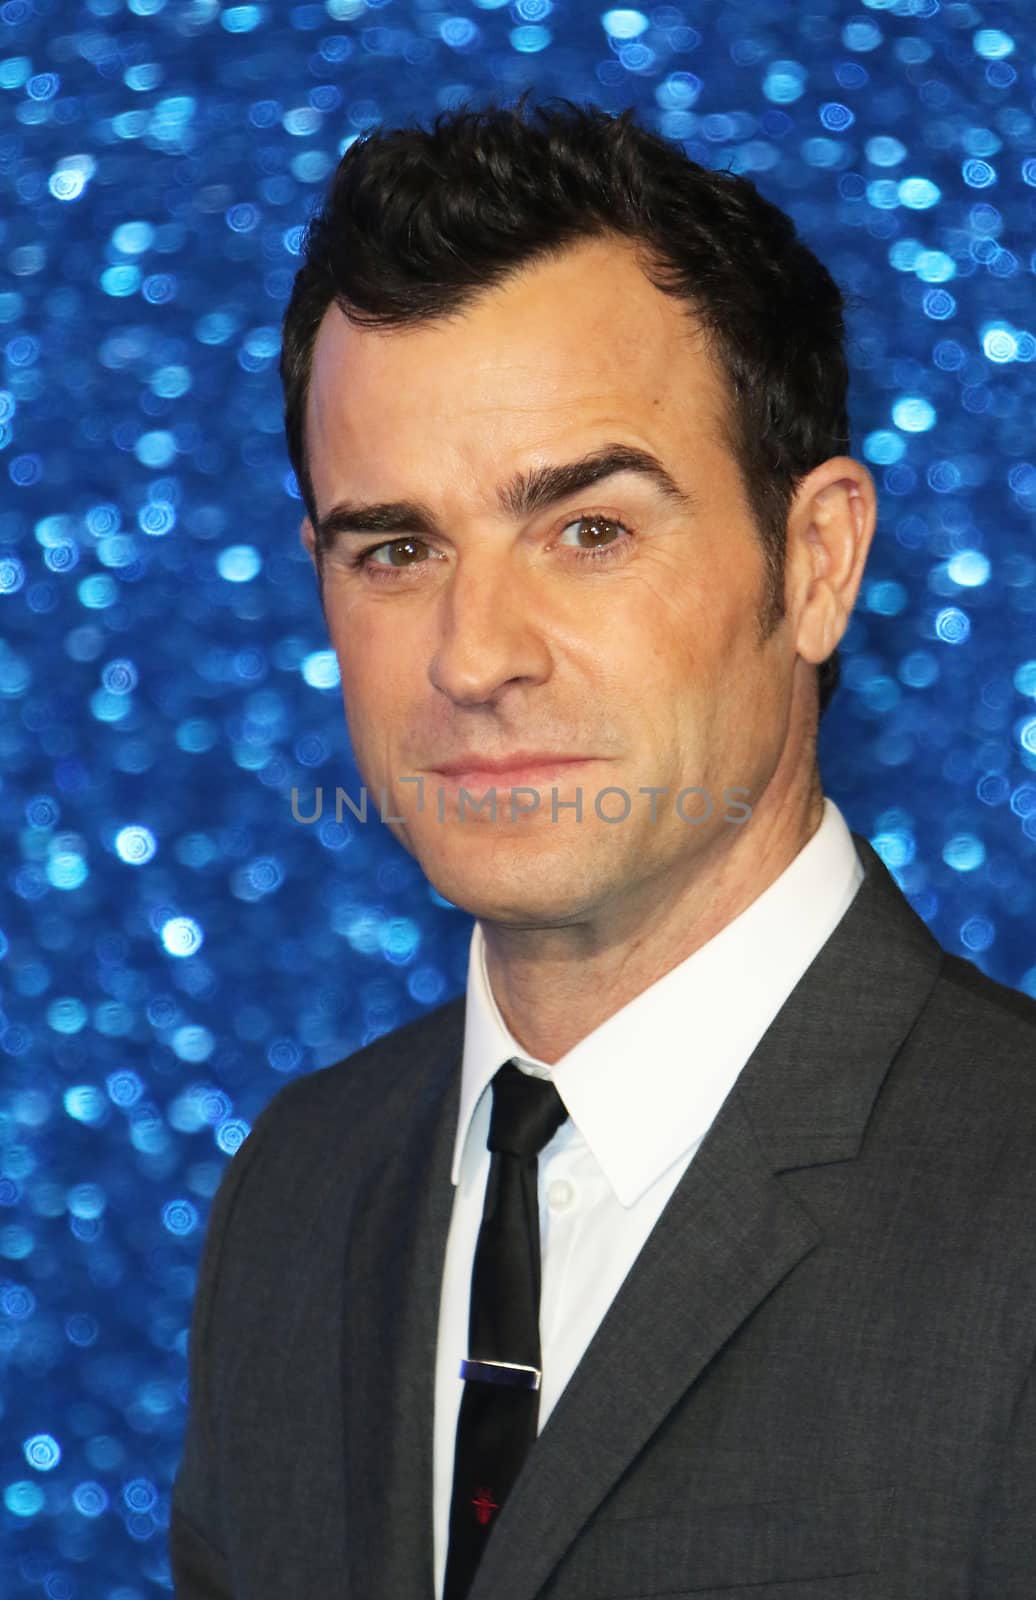 UK, London: Justin Theroux arrives on the blue carpet at Leicester Square in London on February 4, 2016 for a fashionable screening of Zoolander No. 2, the long-awaited sequel to Ben Stiller's trademark hit.